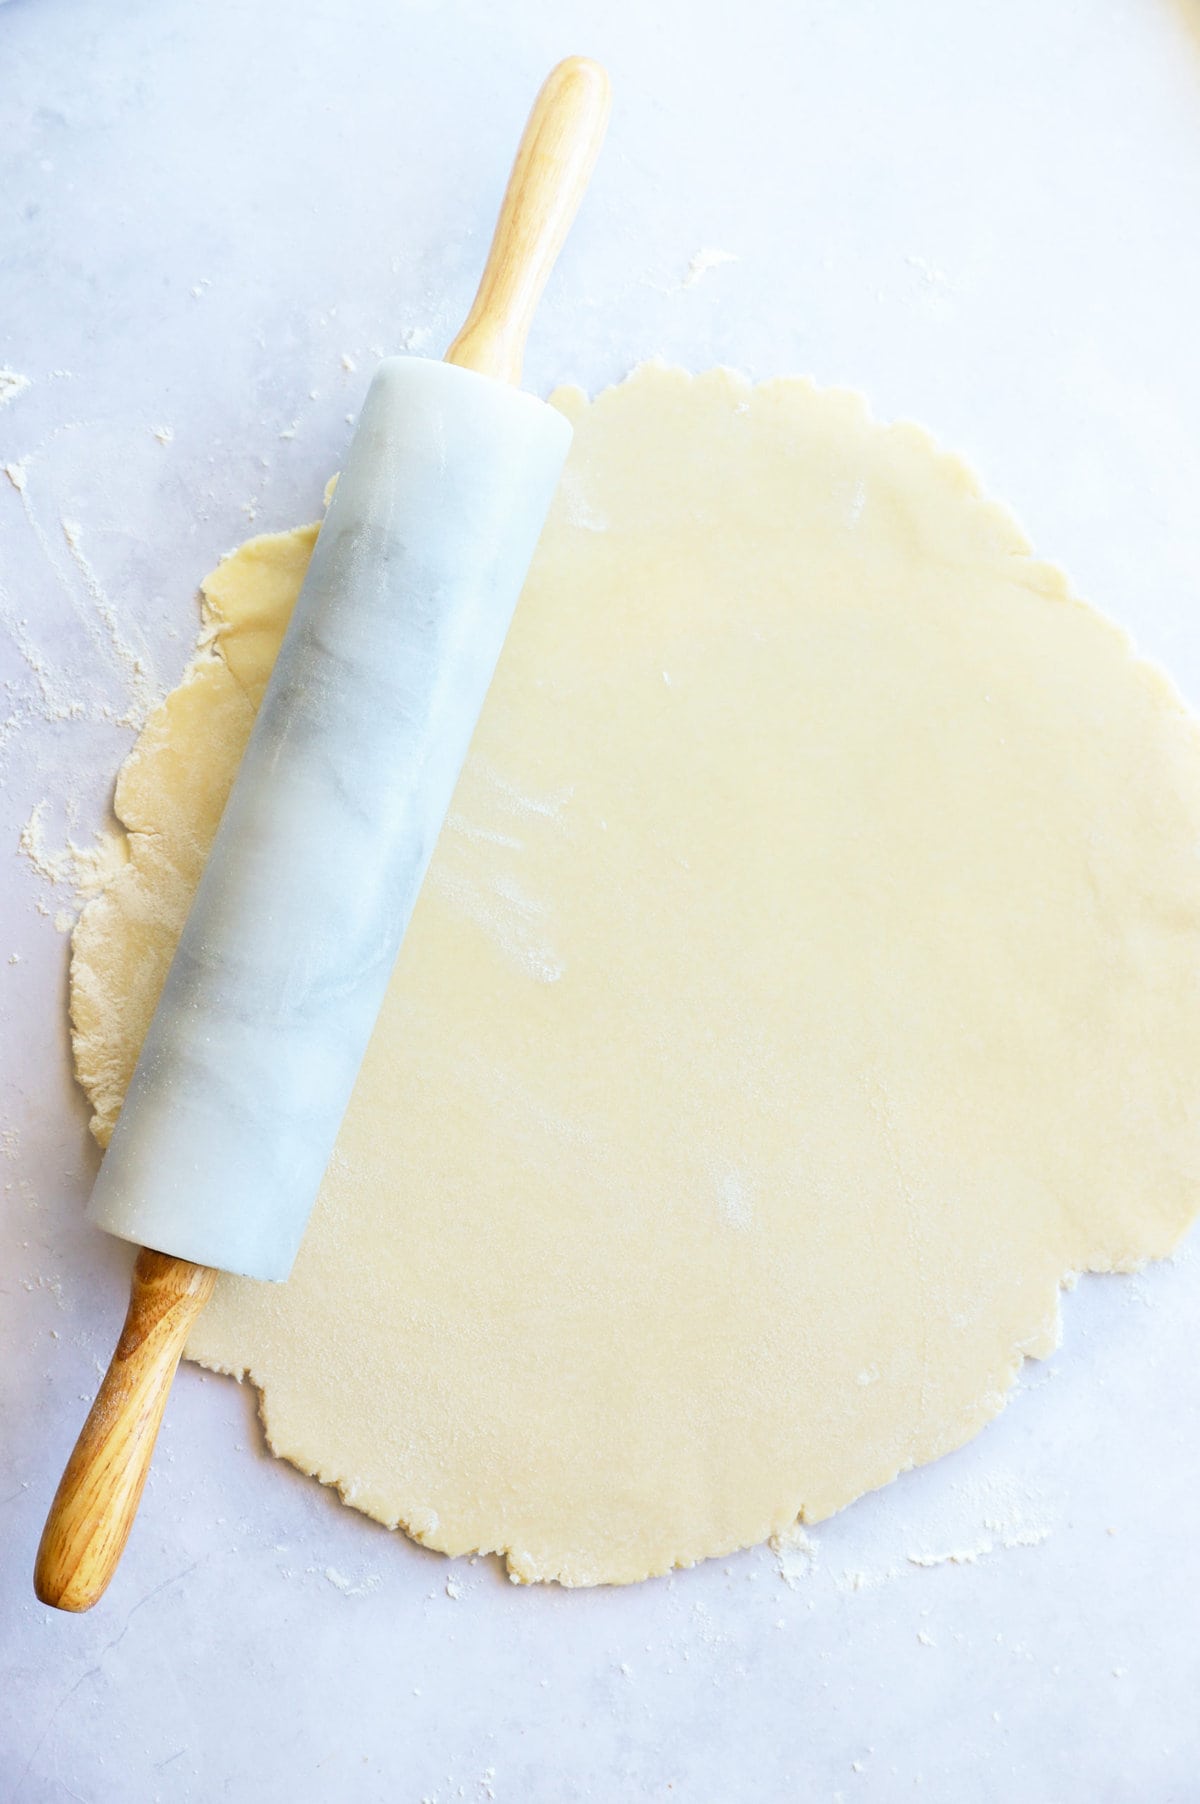 Galette dough rolled out with rolling pin image